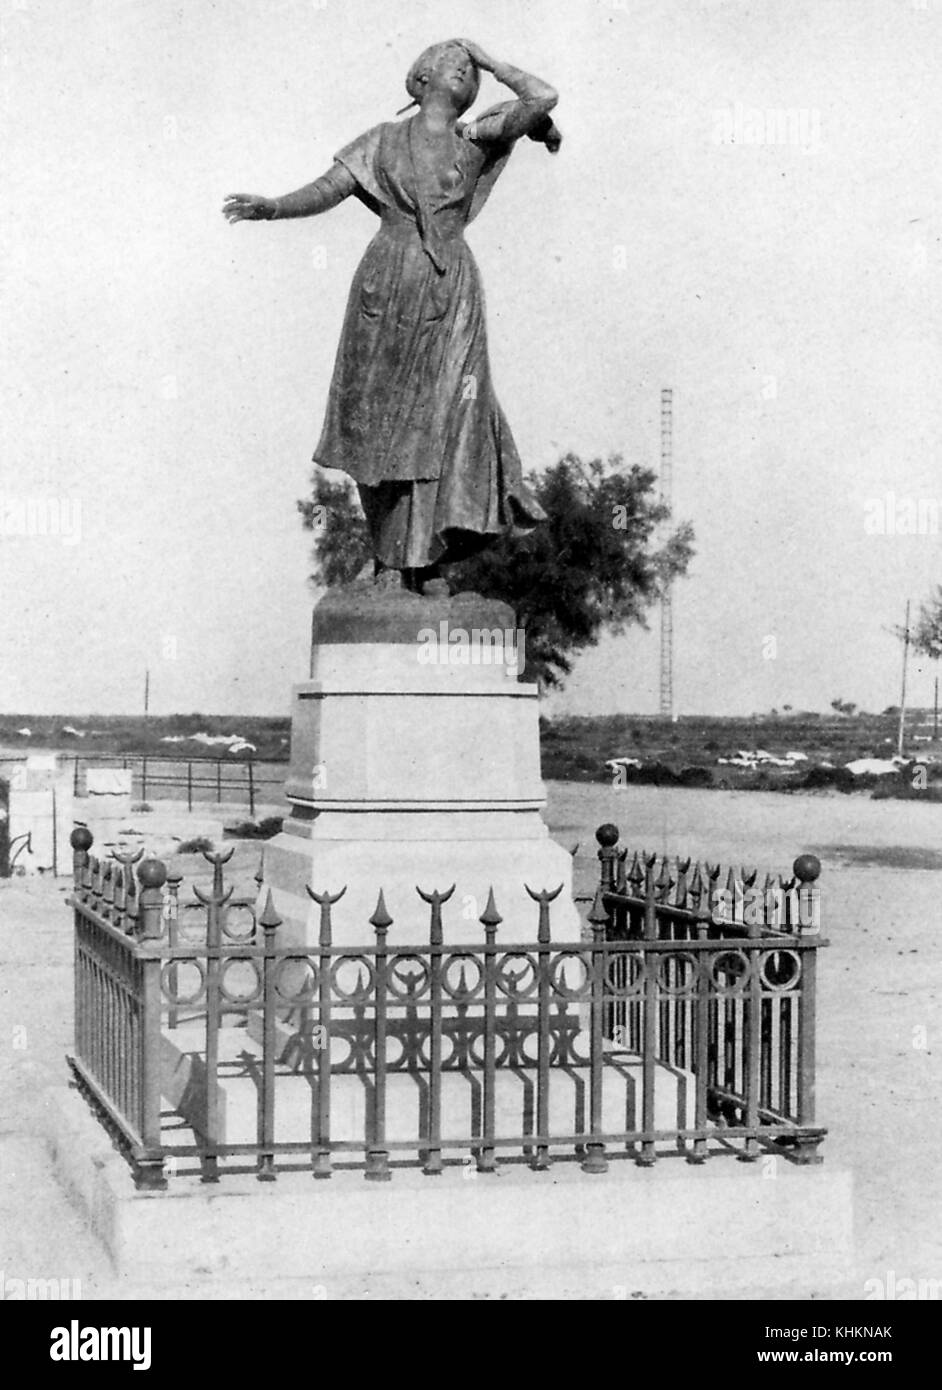 A photograph of a statue of a woman who is wearing a dress, her body posture indicates that she experiencing agony, she is the the central character of a fictional French poem, she escaped her father's home to be with her chosen lover of whom her father disapproves, the statue stands in the city to which she escaped, Saintes-Maries-de-la-Mer, Camargue, France, July, 1922. Stock Photo